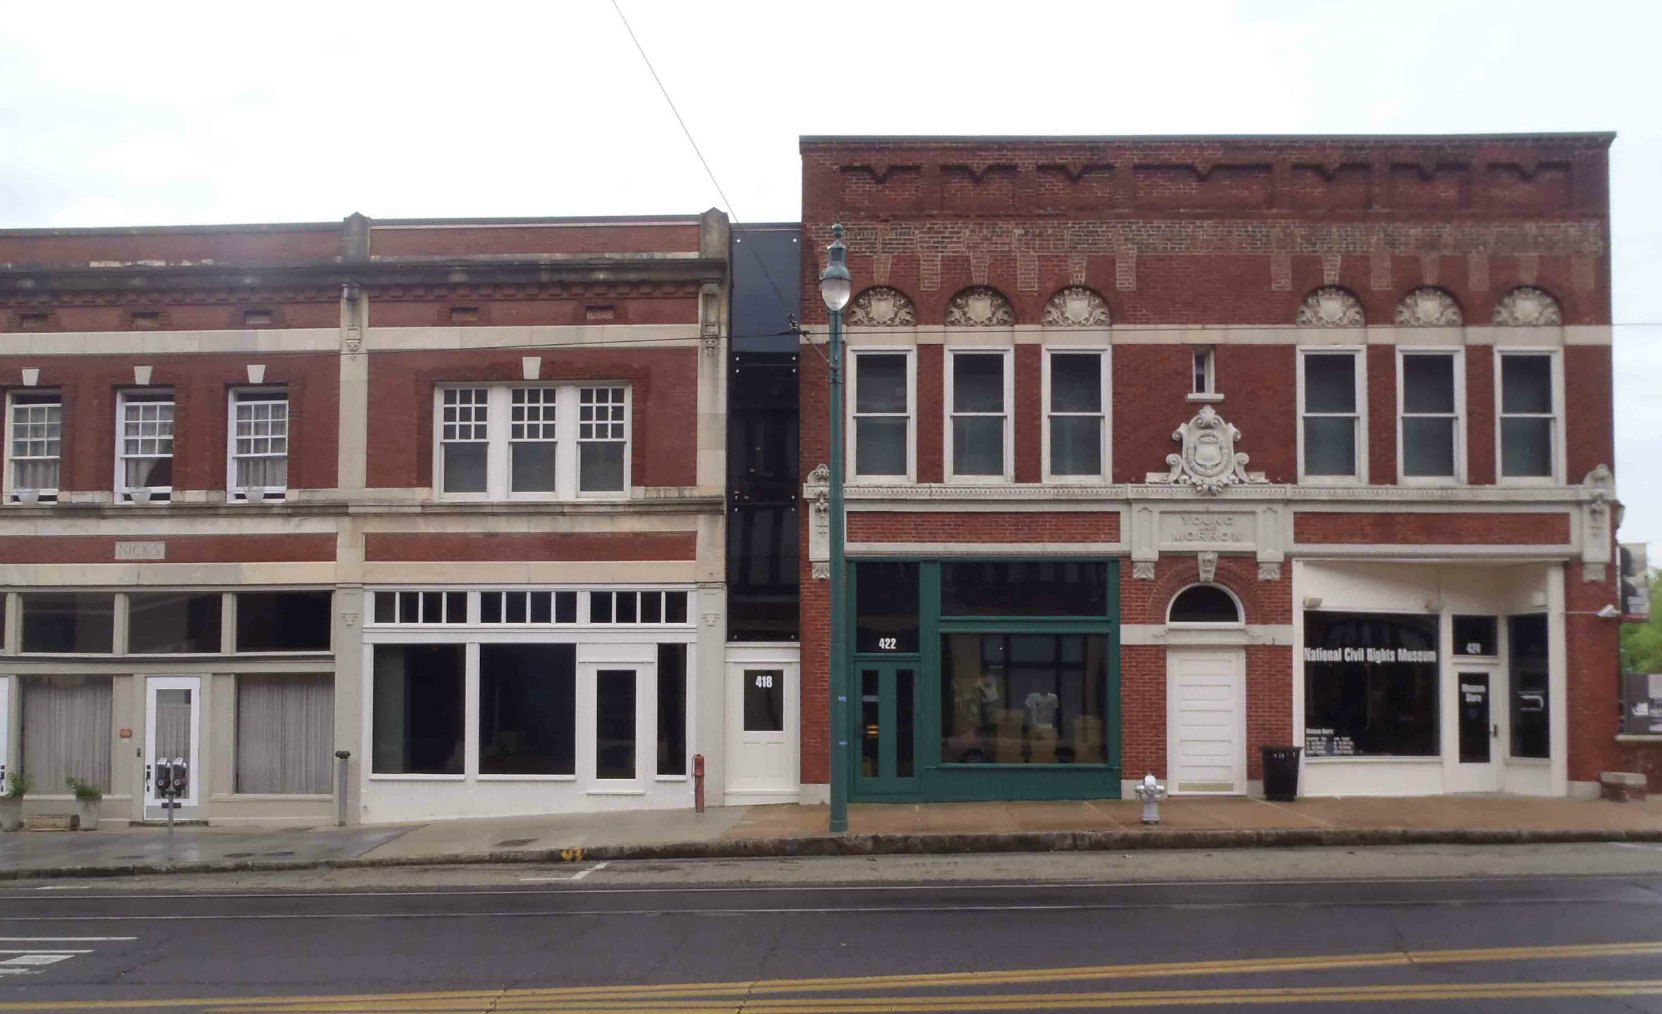 The Young & Morrow building (right) and James Earl Ray's rooming house (left) on S. Main Street, Memphis, Tennessee. The former alley between the buildings has been enclosed and both buildings are now part of the National Civil Rights Museum.